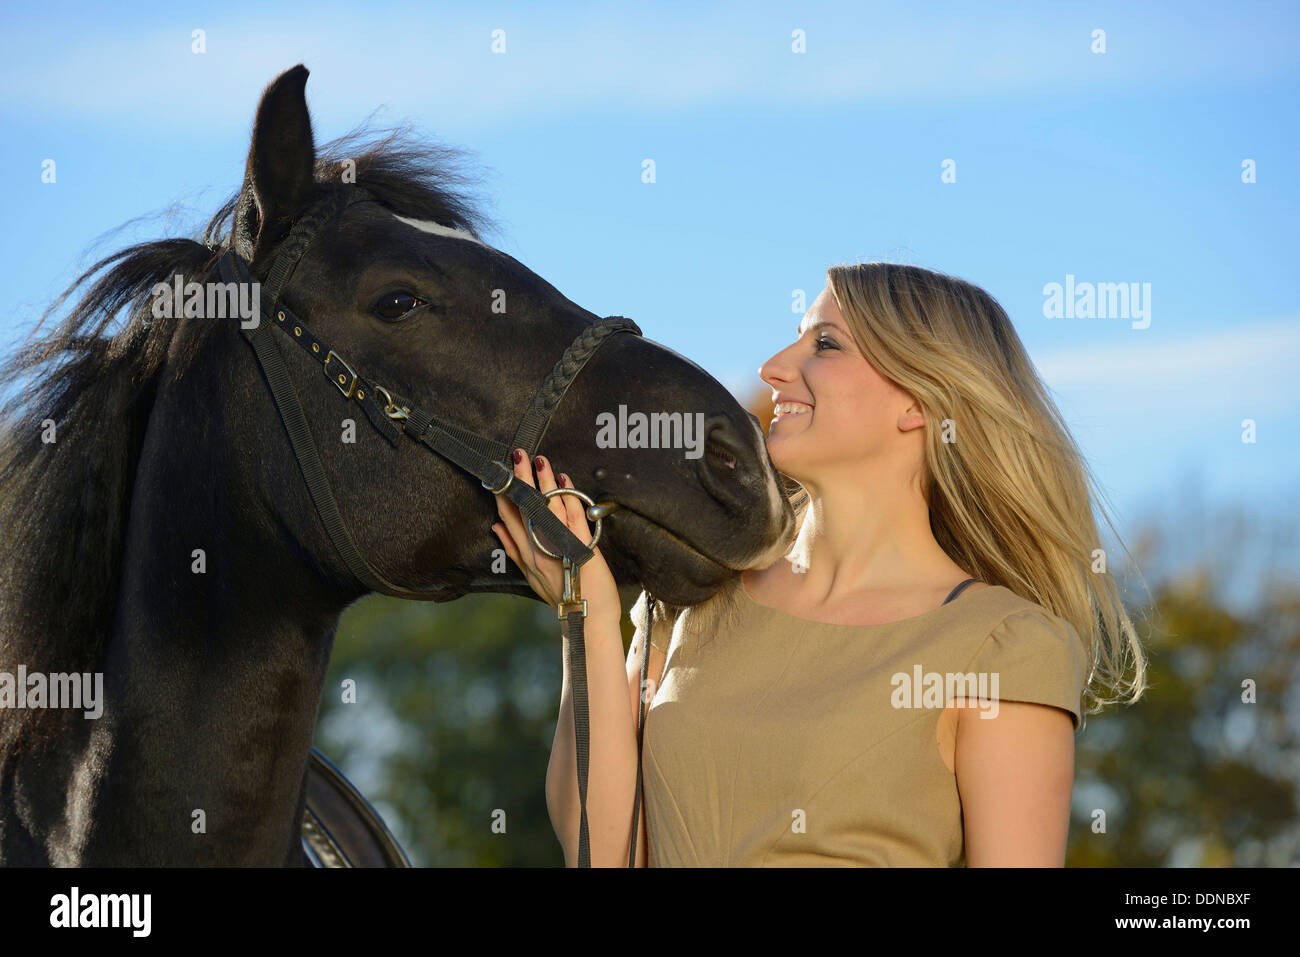 Young woman with horse, Upper Palatinate, Germany, Europe Stock Photo